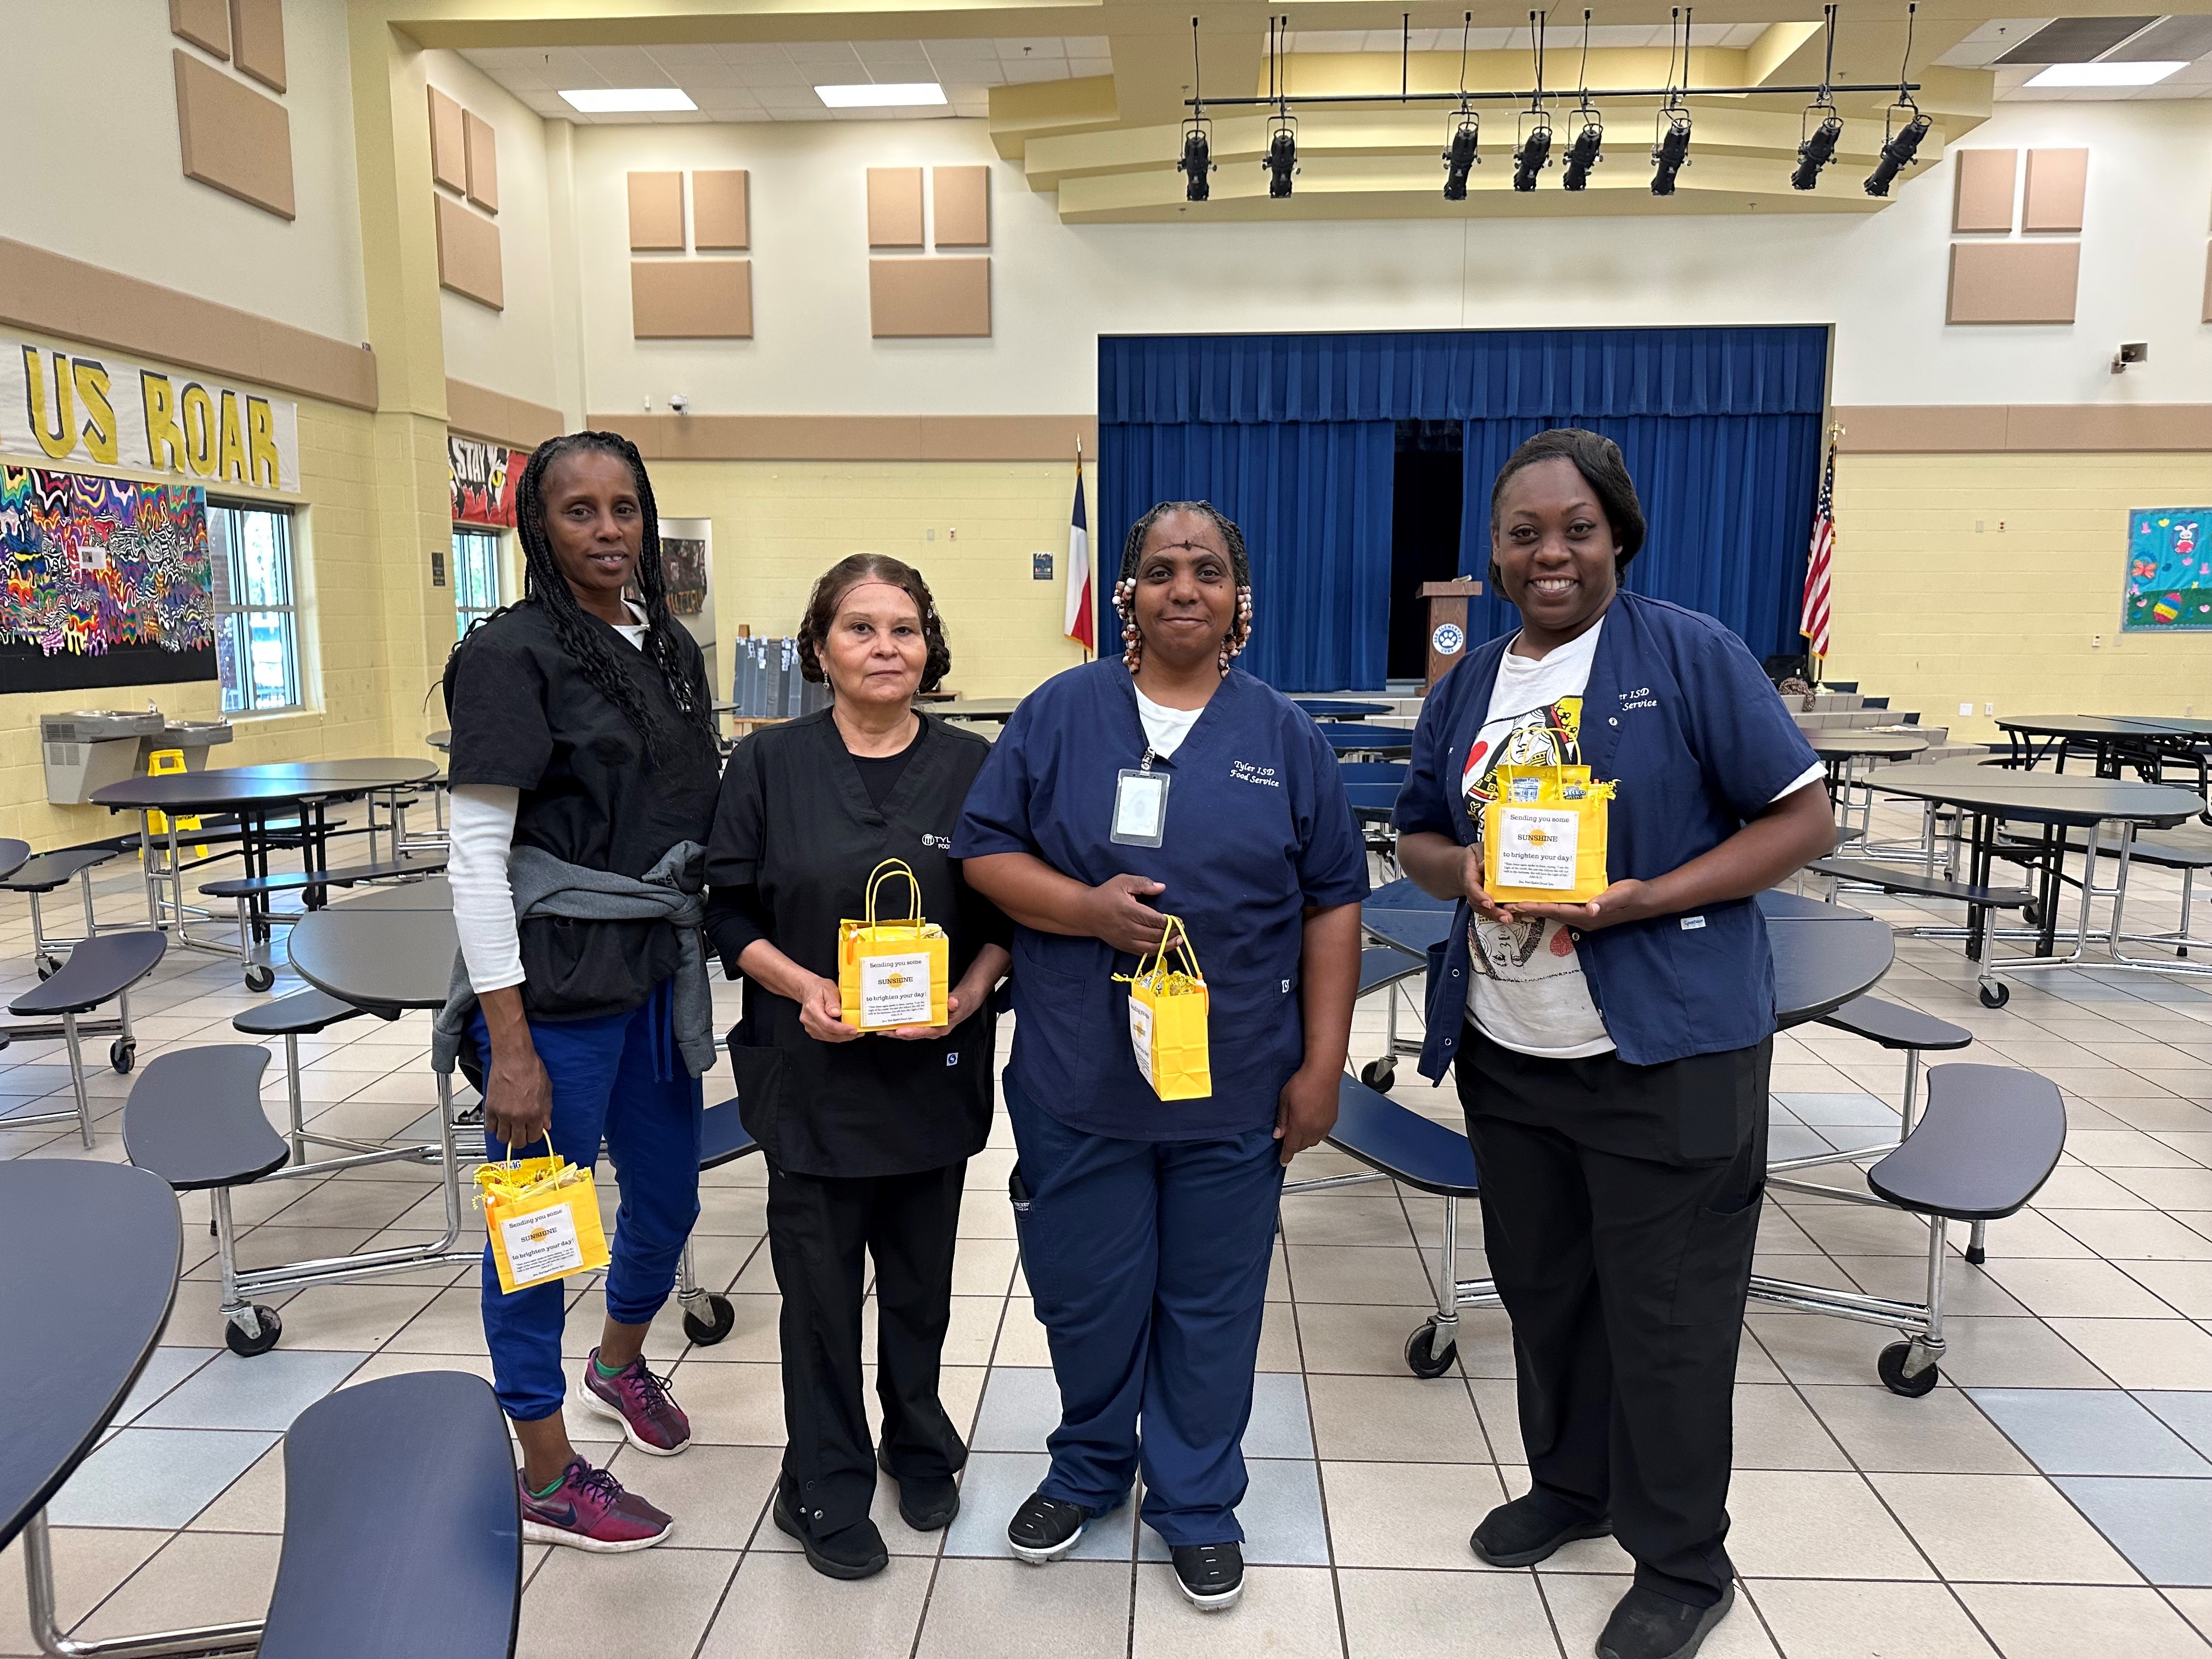 four women standing in a school cafeteria holding yellow gift bags